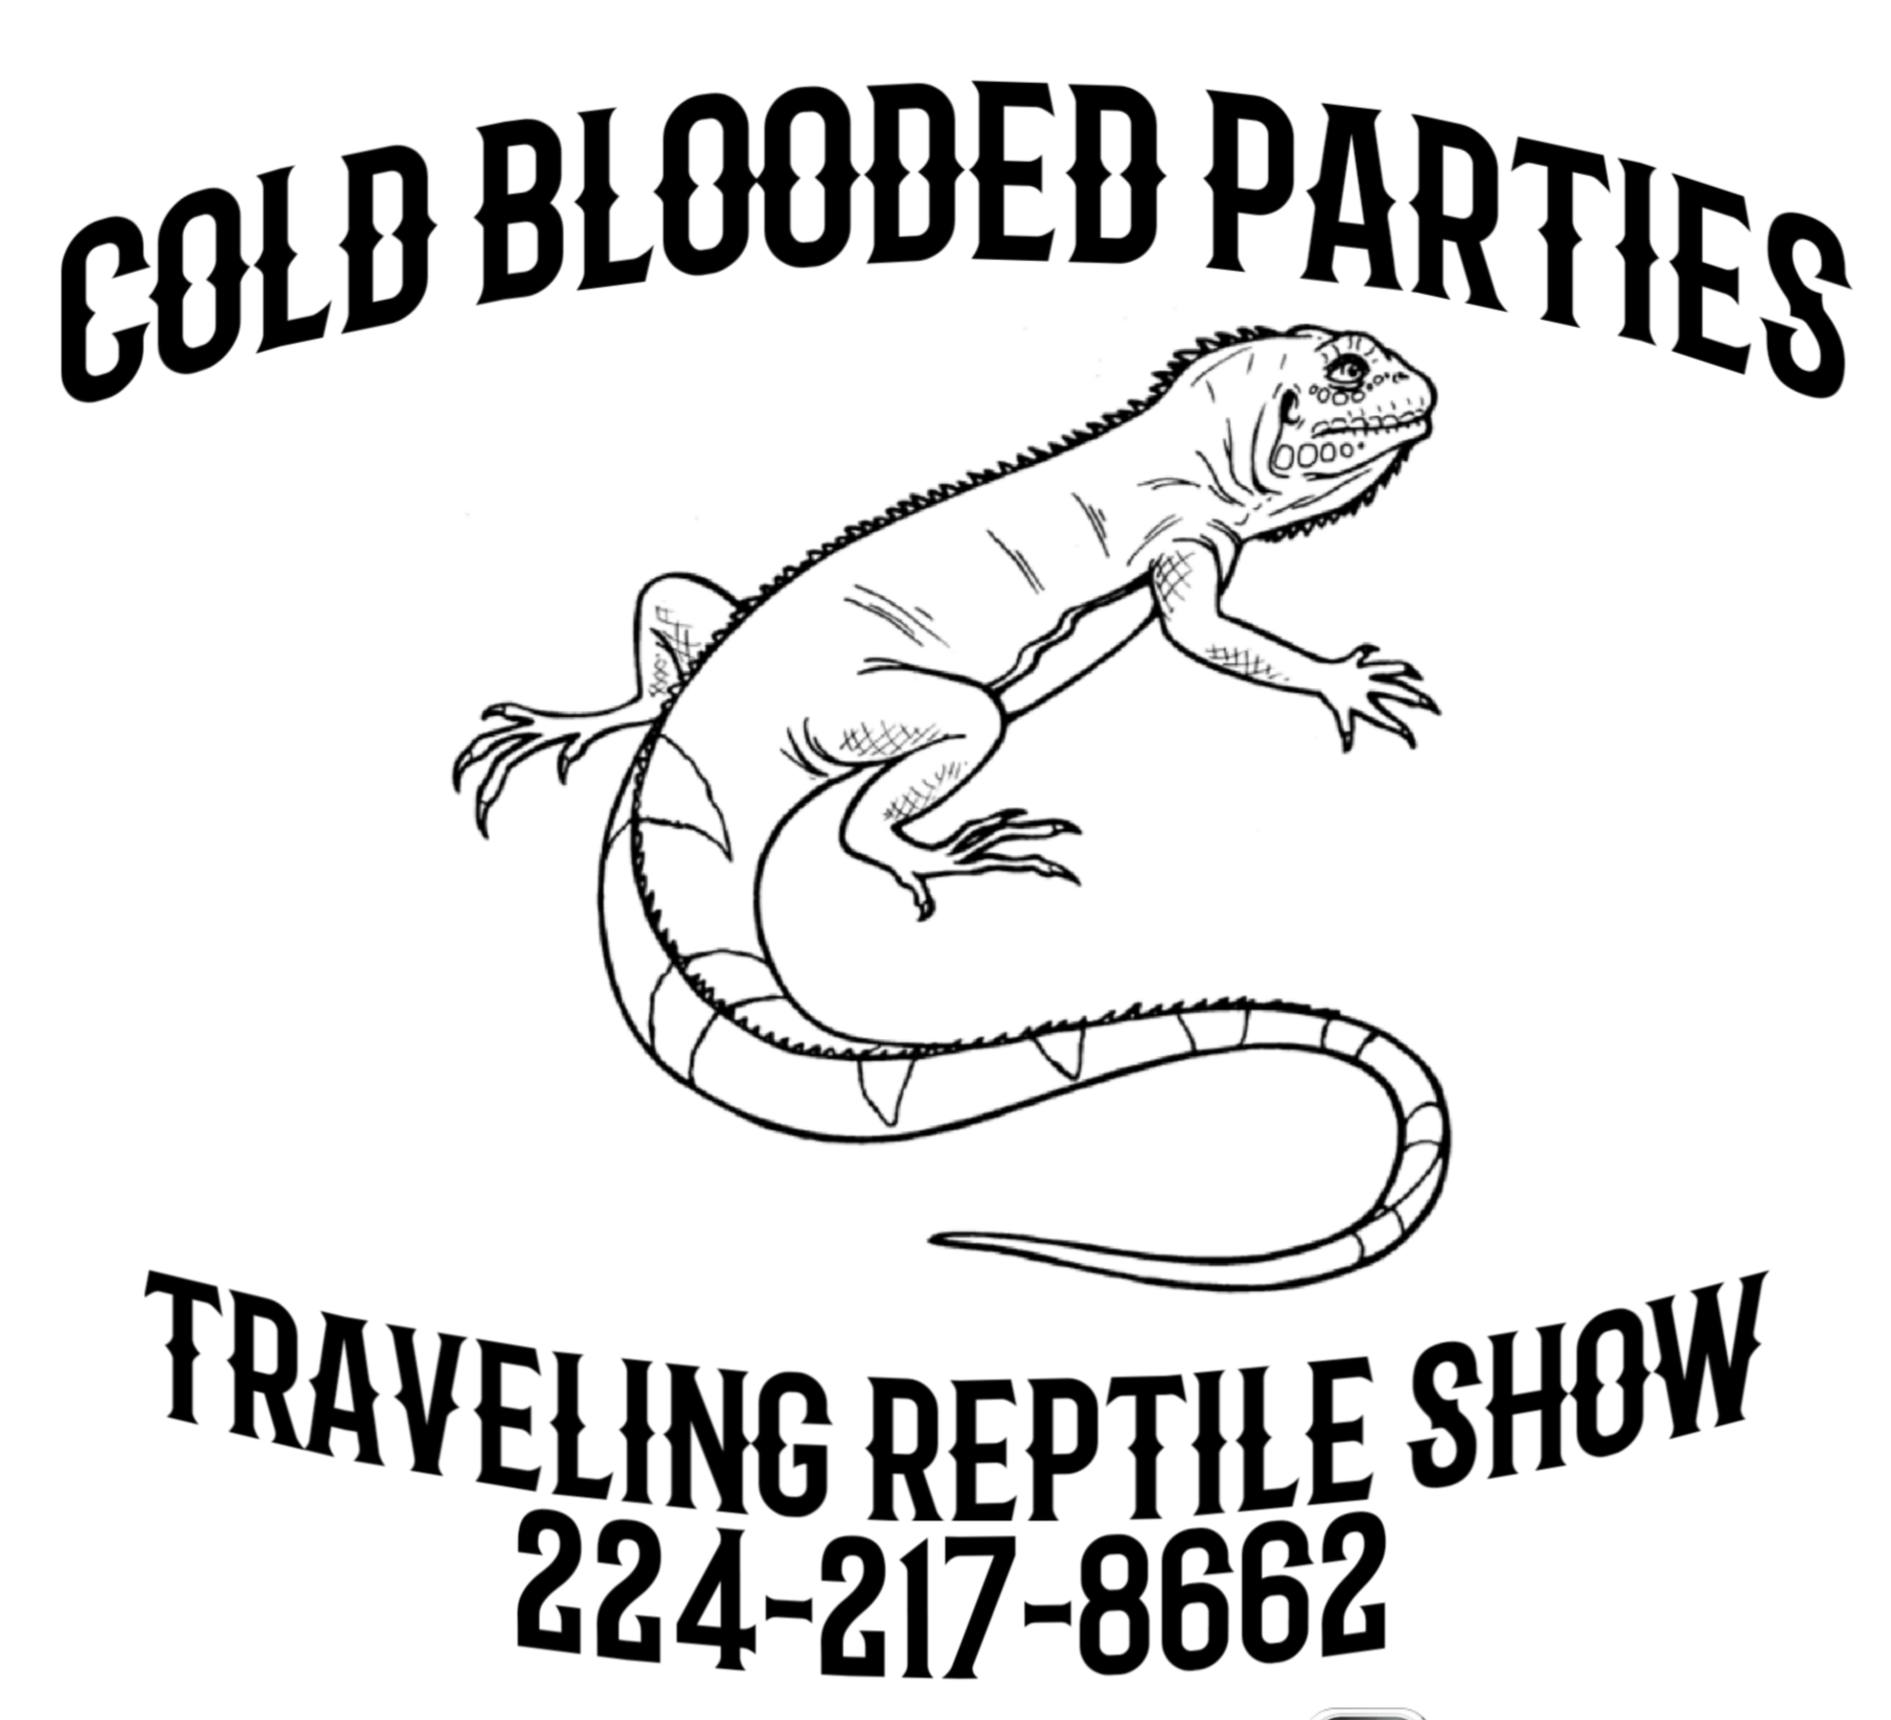 Cold Blooded Parties Traveling Reptile Show